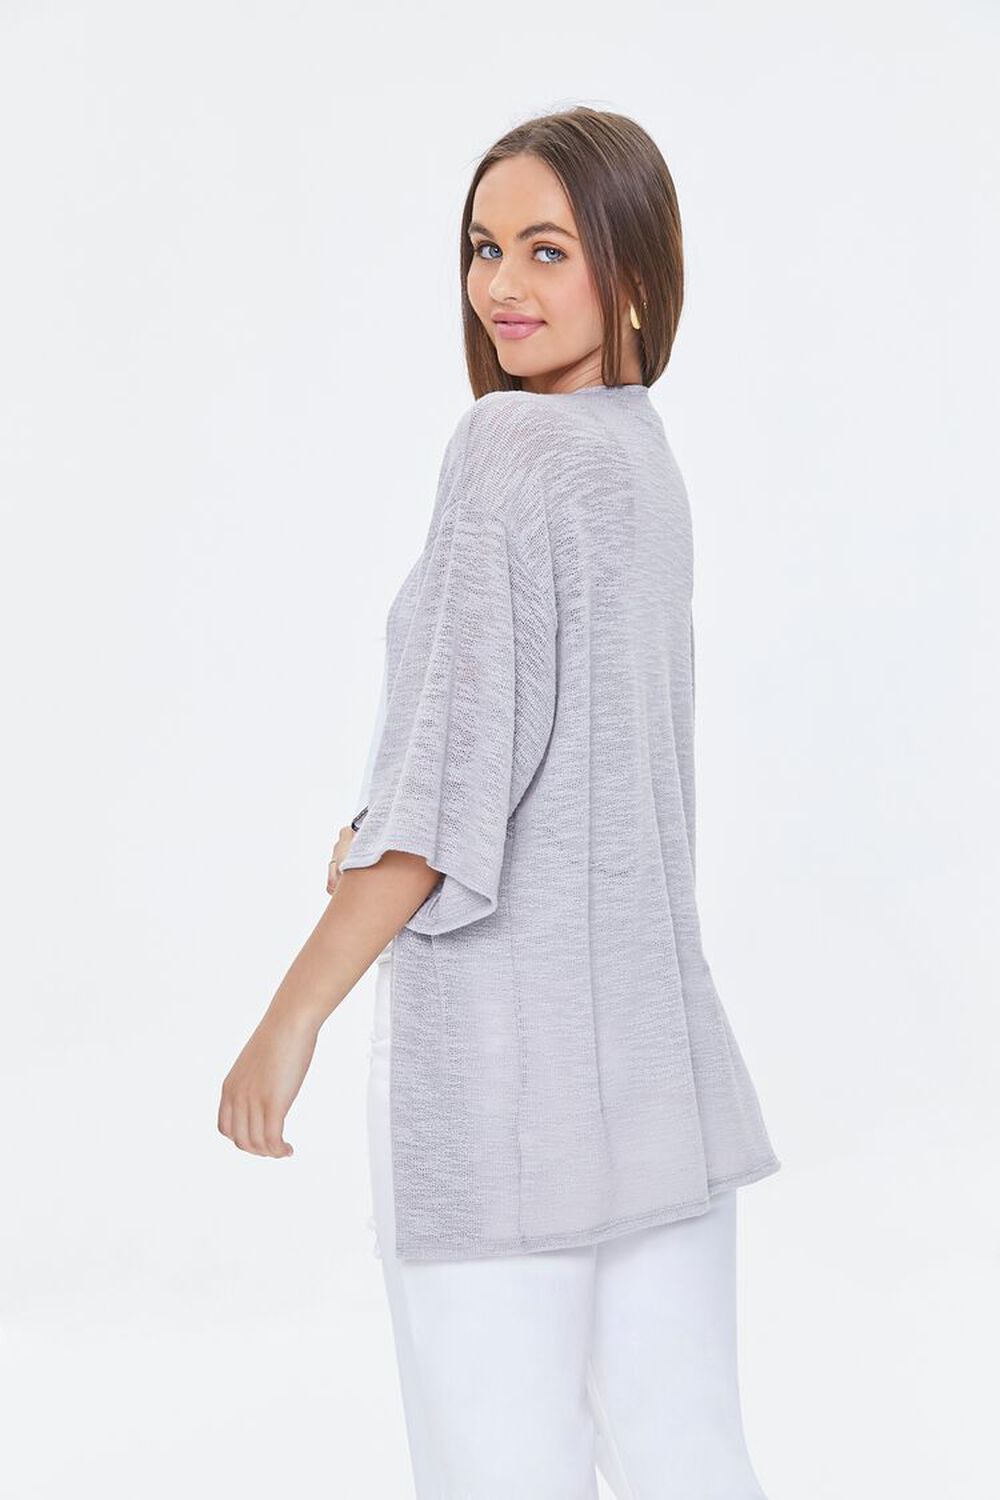 GREY Open-Front Cardigan Sweater, image 3